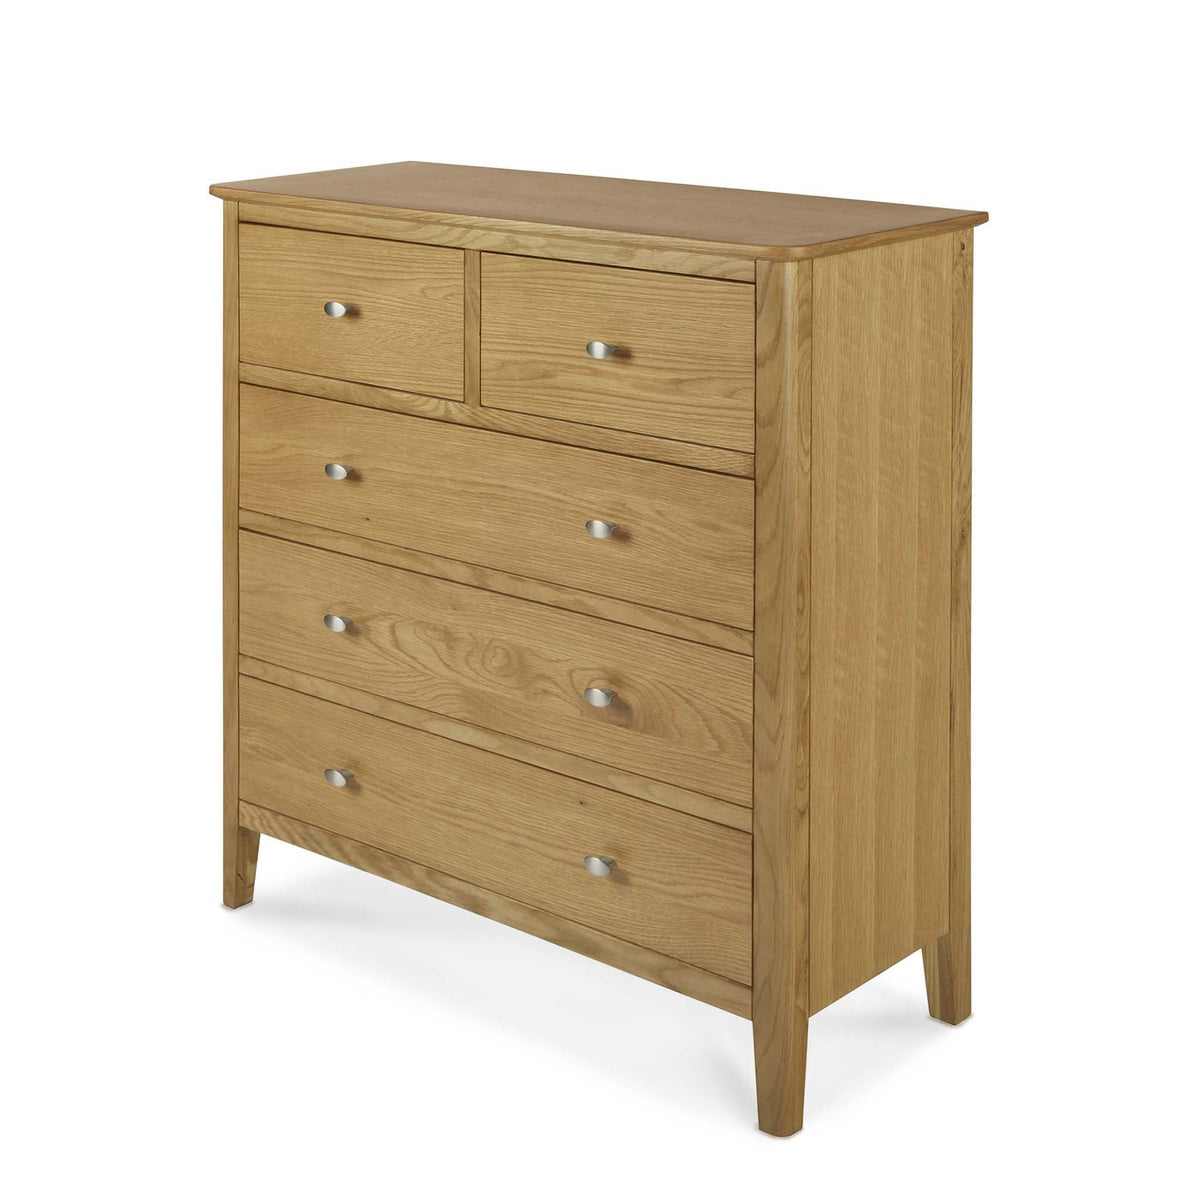 Alba Oak 2 Over 3 Chest of Drawers - Side view